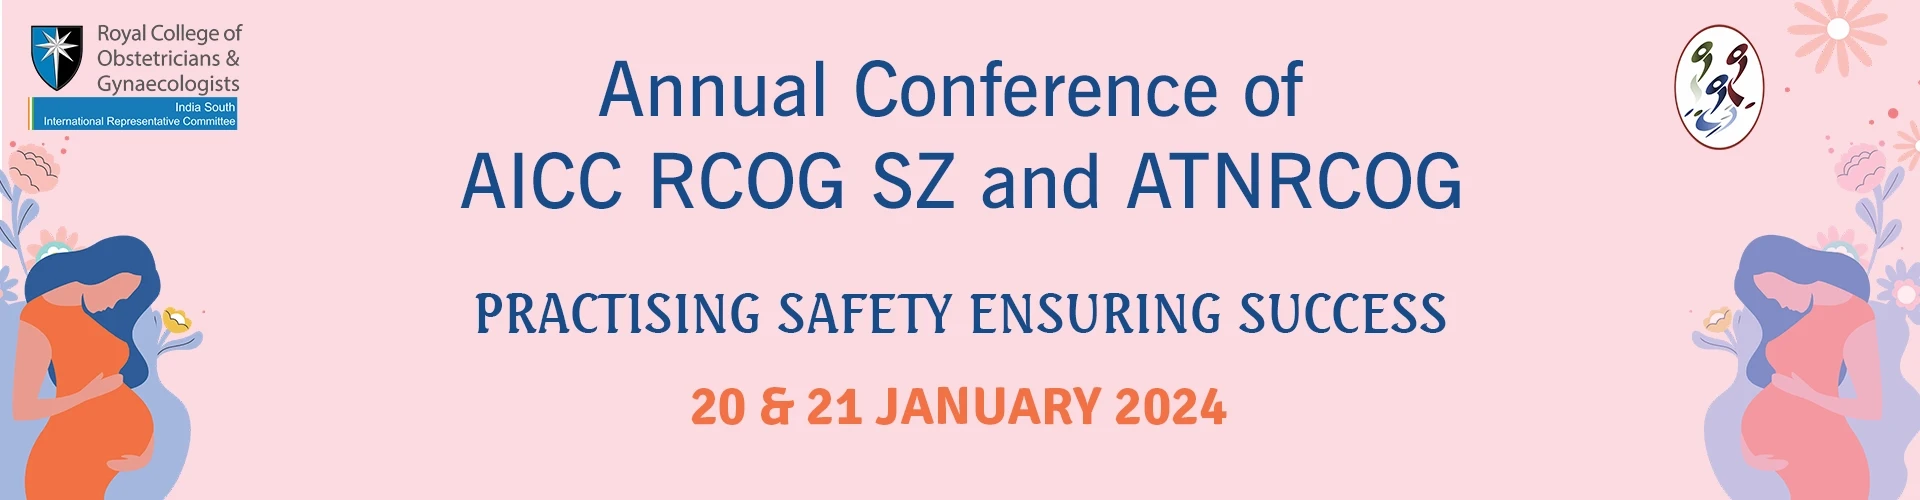 3rd_Annual_Conference_2022_banner